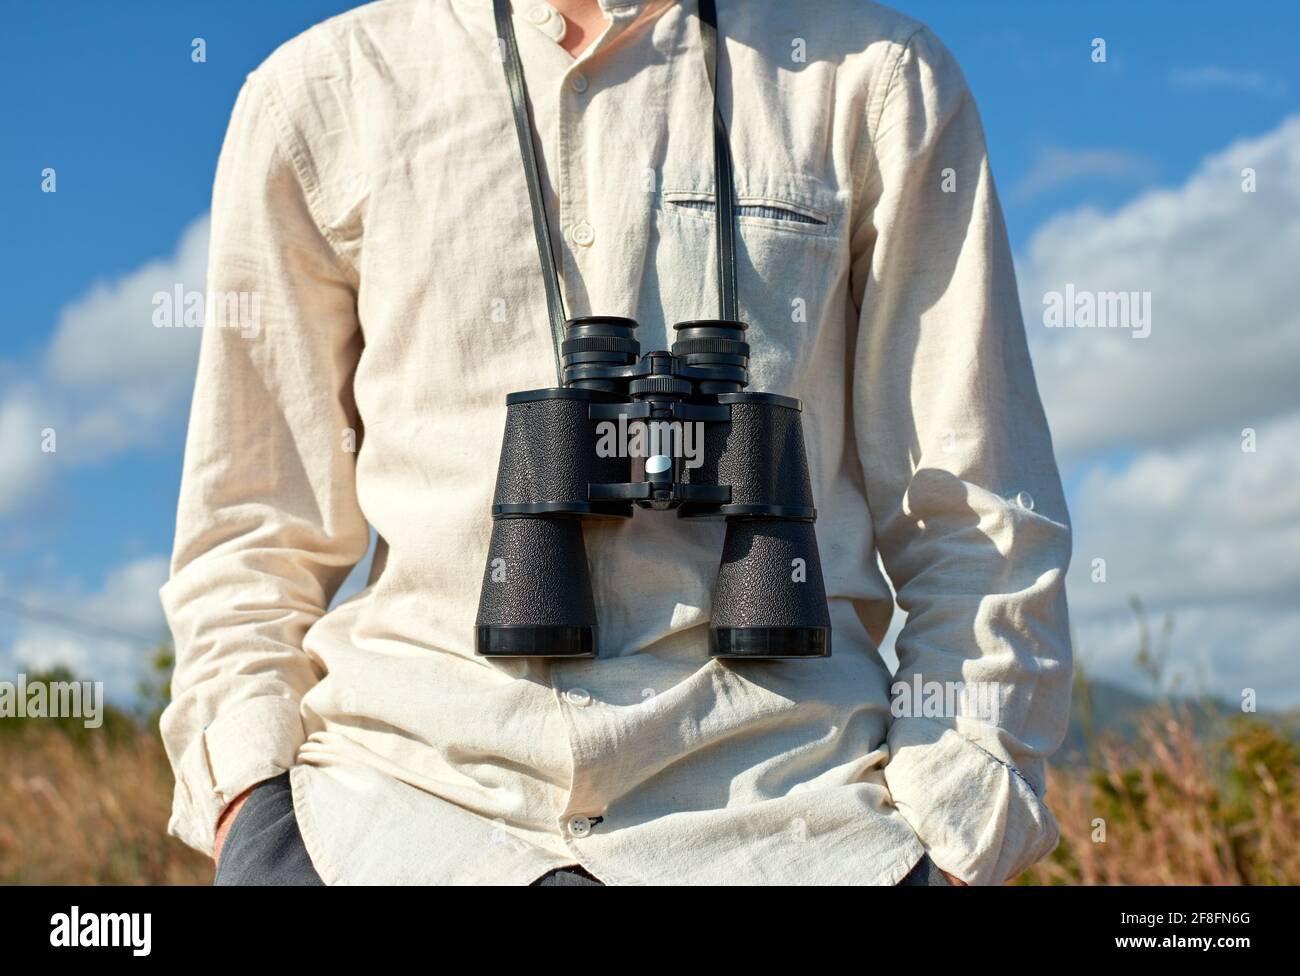 Closeup, front view of a relaxed young man in a white shirt with binoculars hanging around his neck Stock Photo